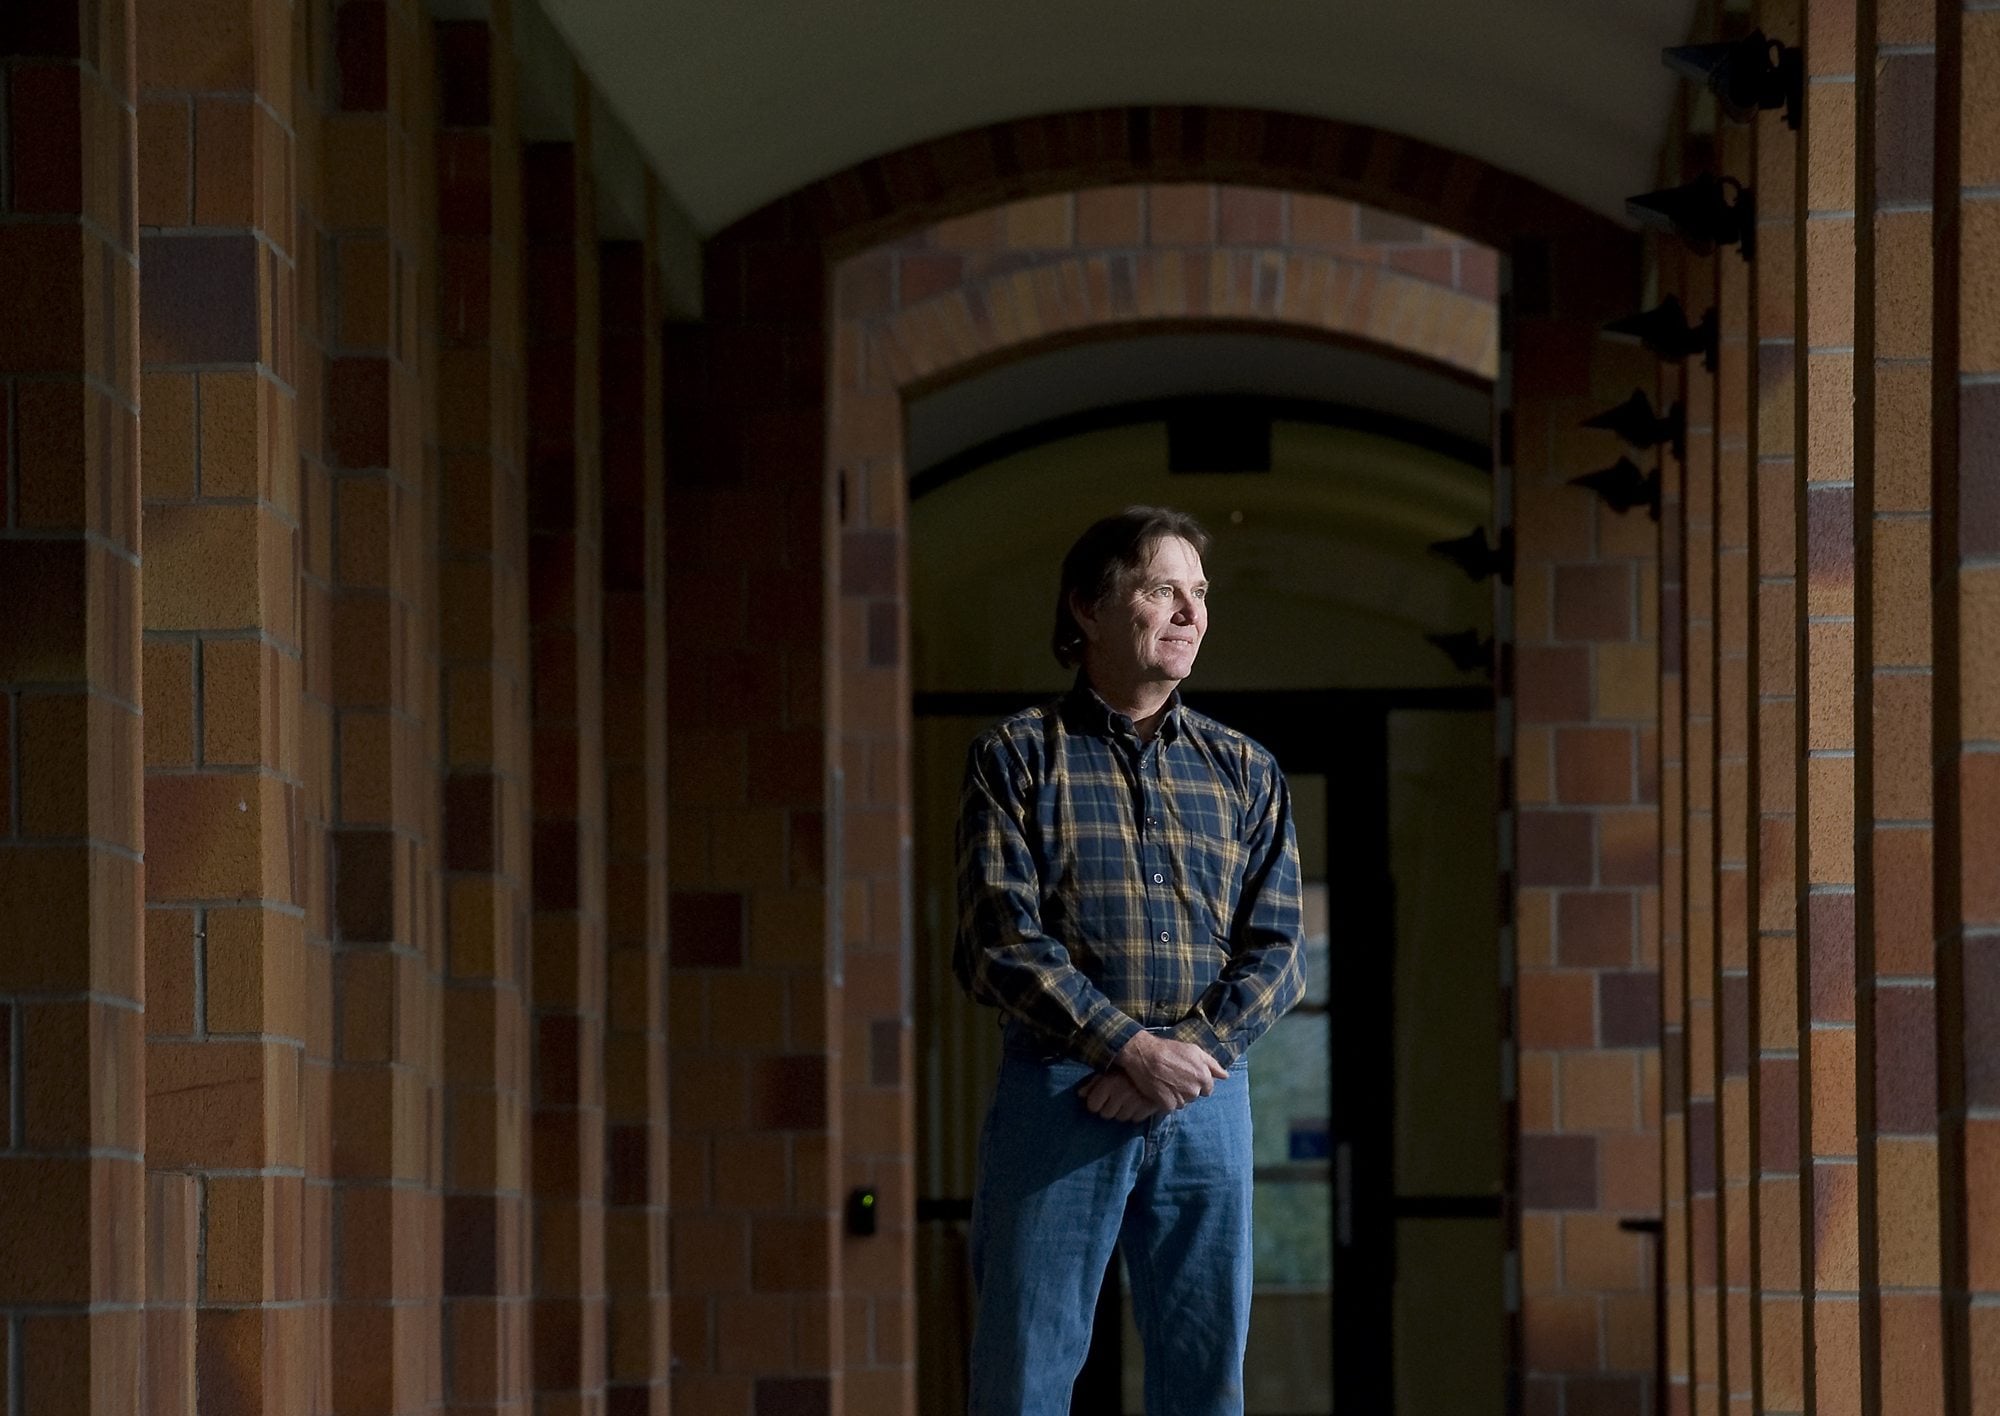 Mike Seely of Seely Family Farm in Clatskanie, Ore., pauses at Washington State University Vancouver, where he earned a master's of business administration degree.